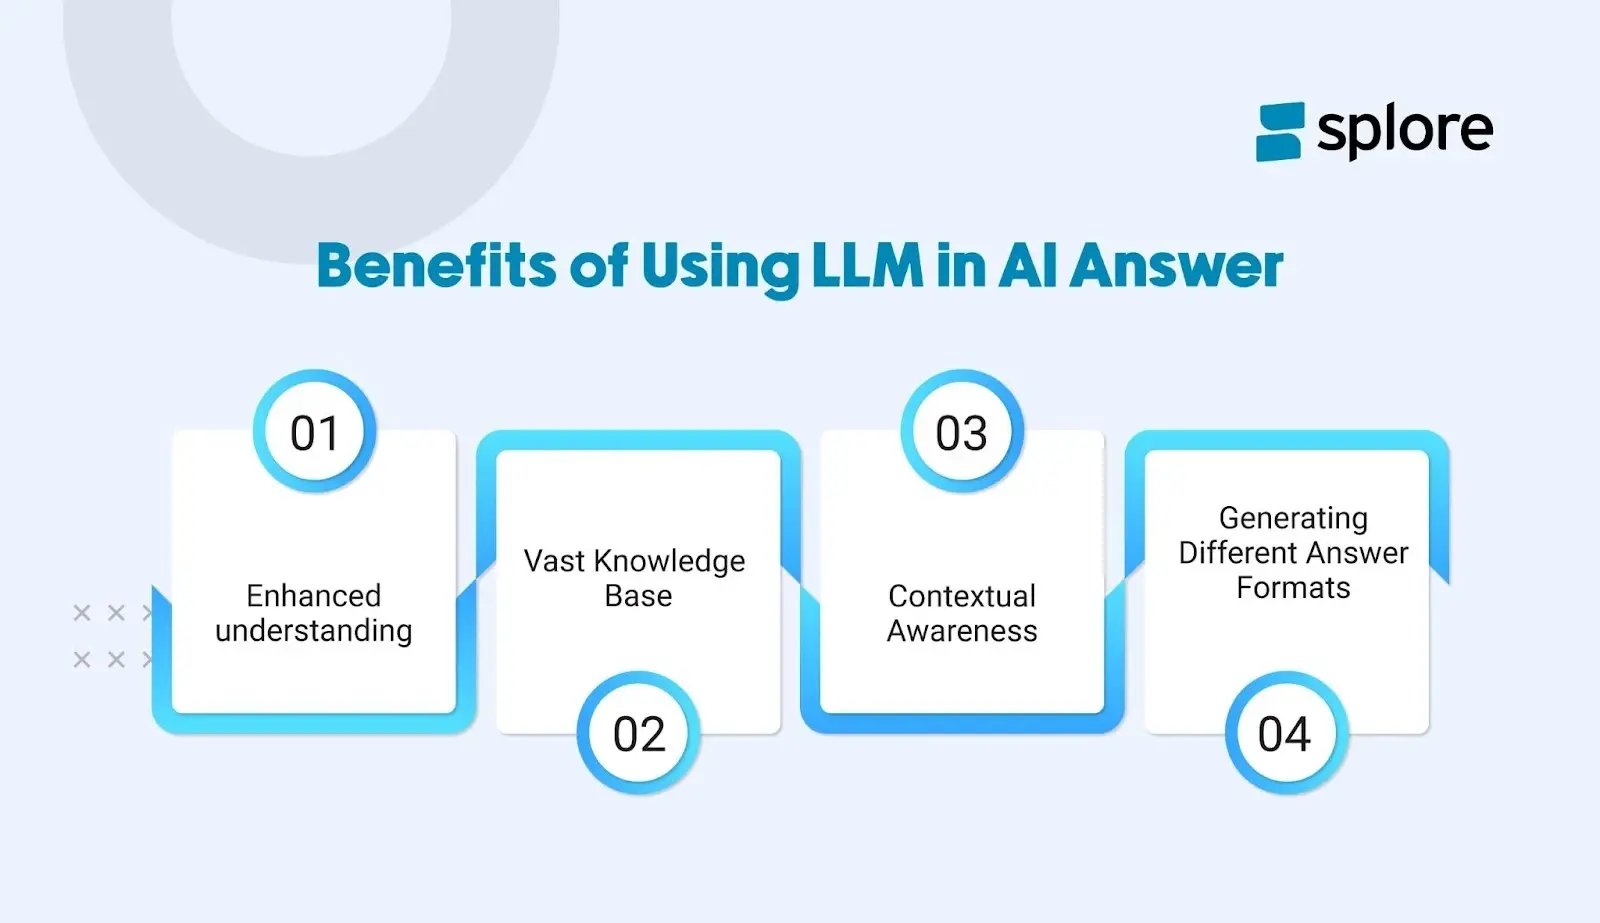 Benefits of Using LLM in AI Answer